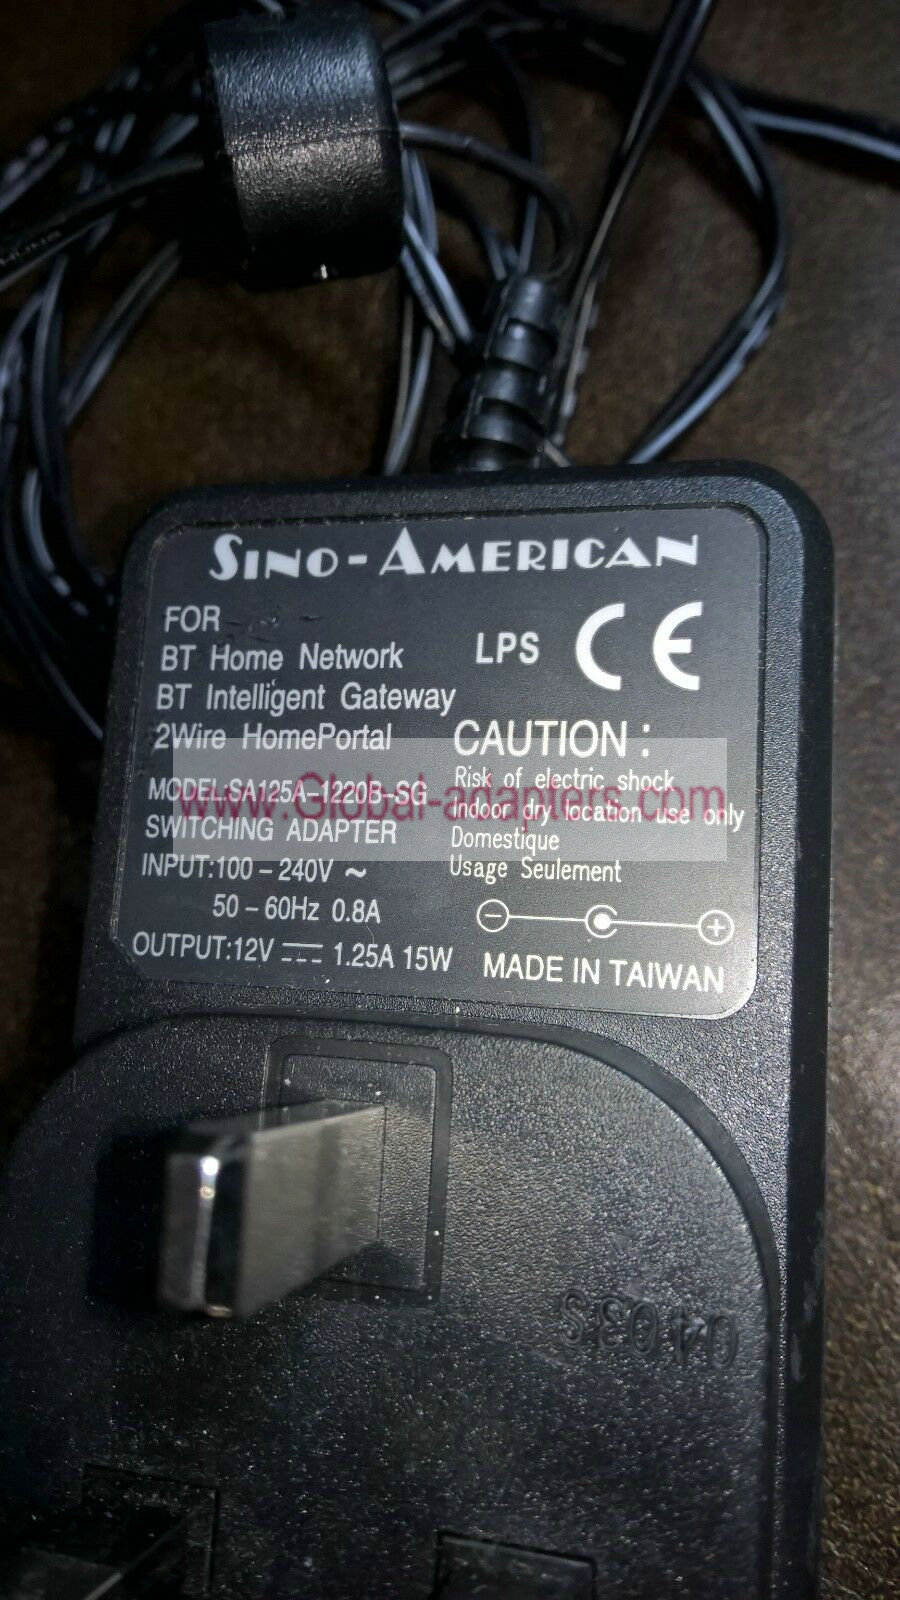 New Sino-American SA125A-1220B-SG AC Adapter for BT Home Network